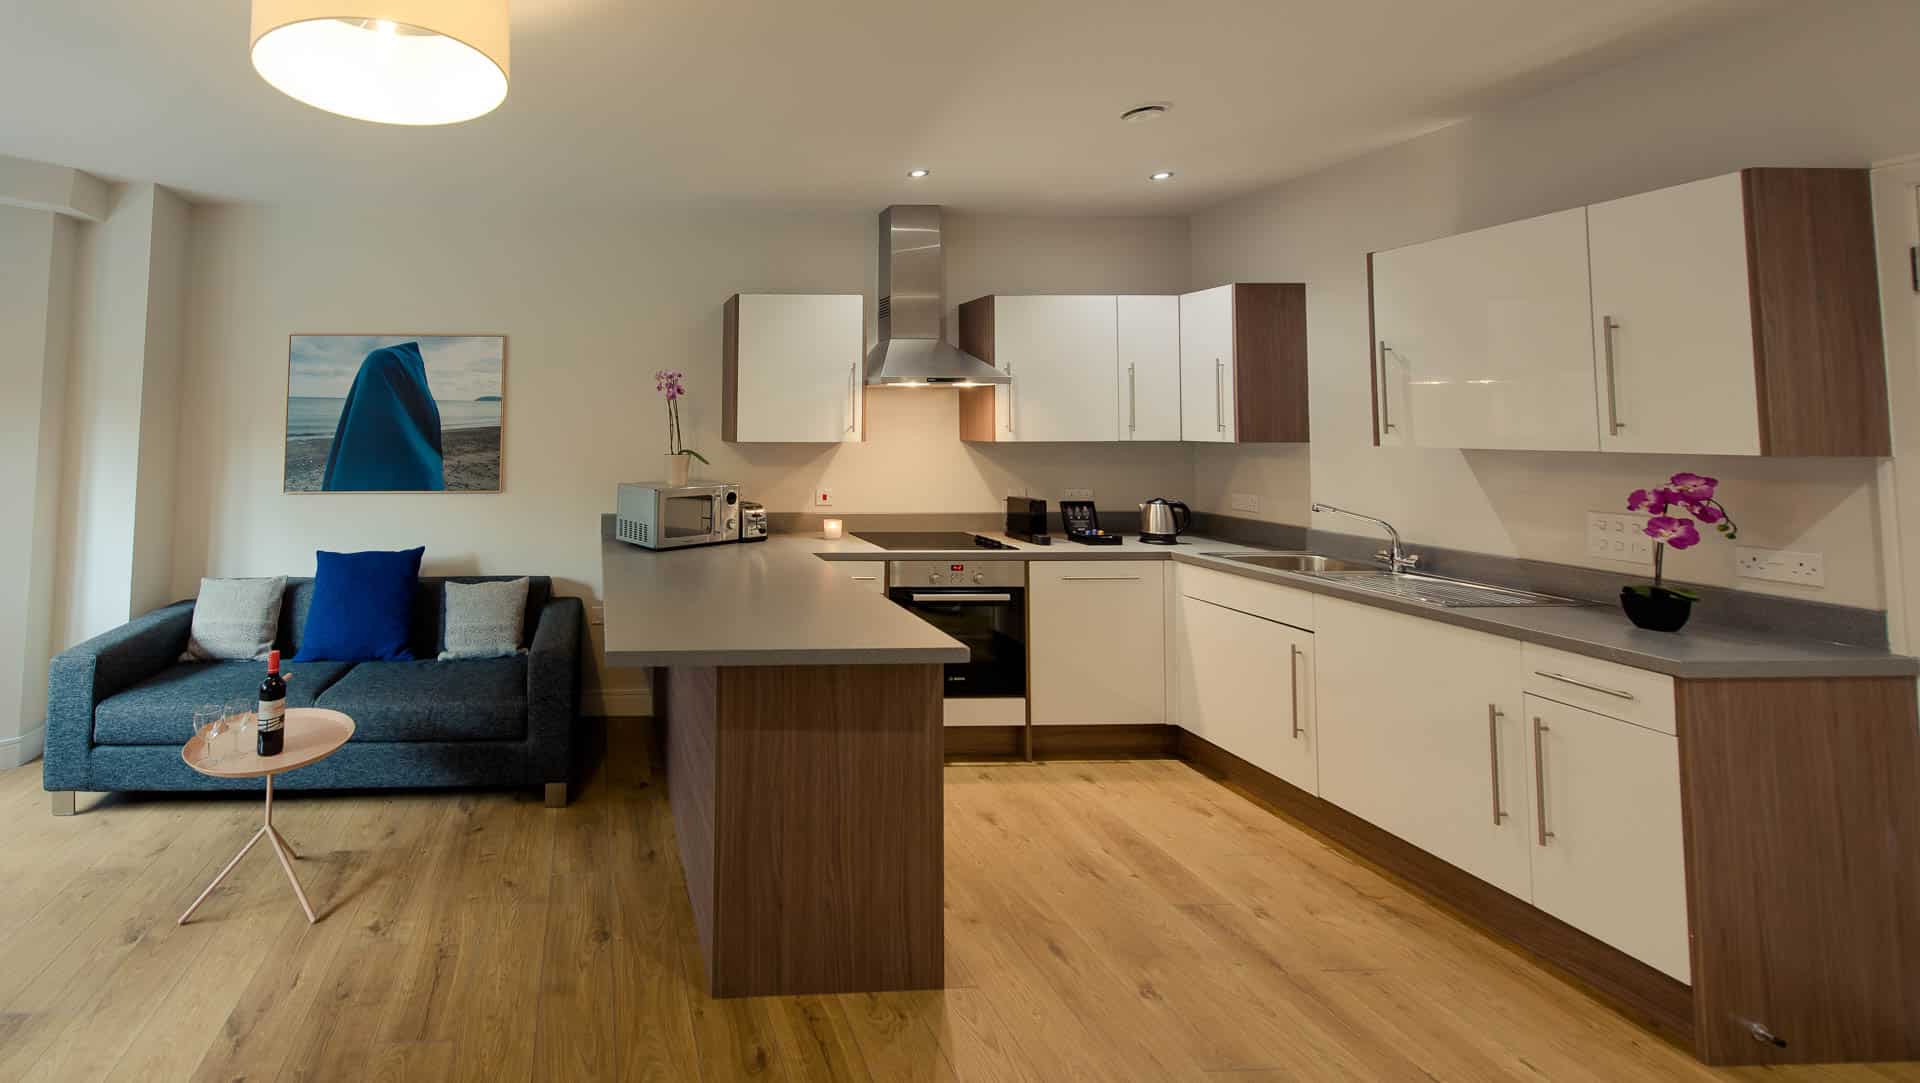 Kitchen and living area of a one bed apartment PREMIER SUITES PLUS Glasgow Bath Street